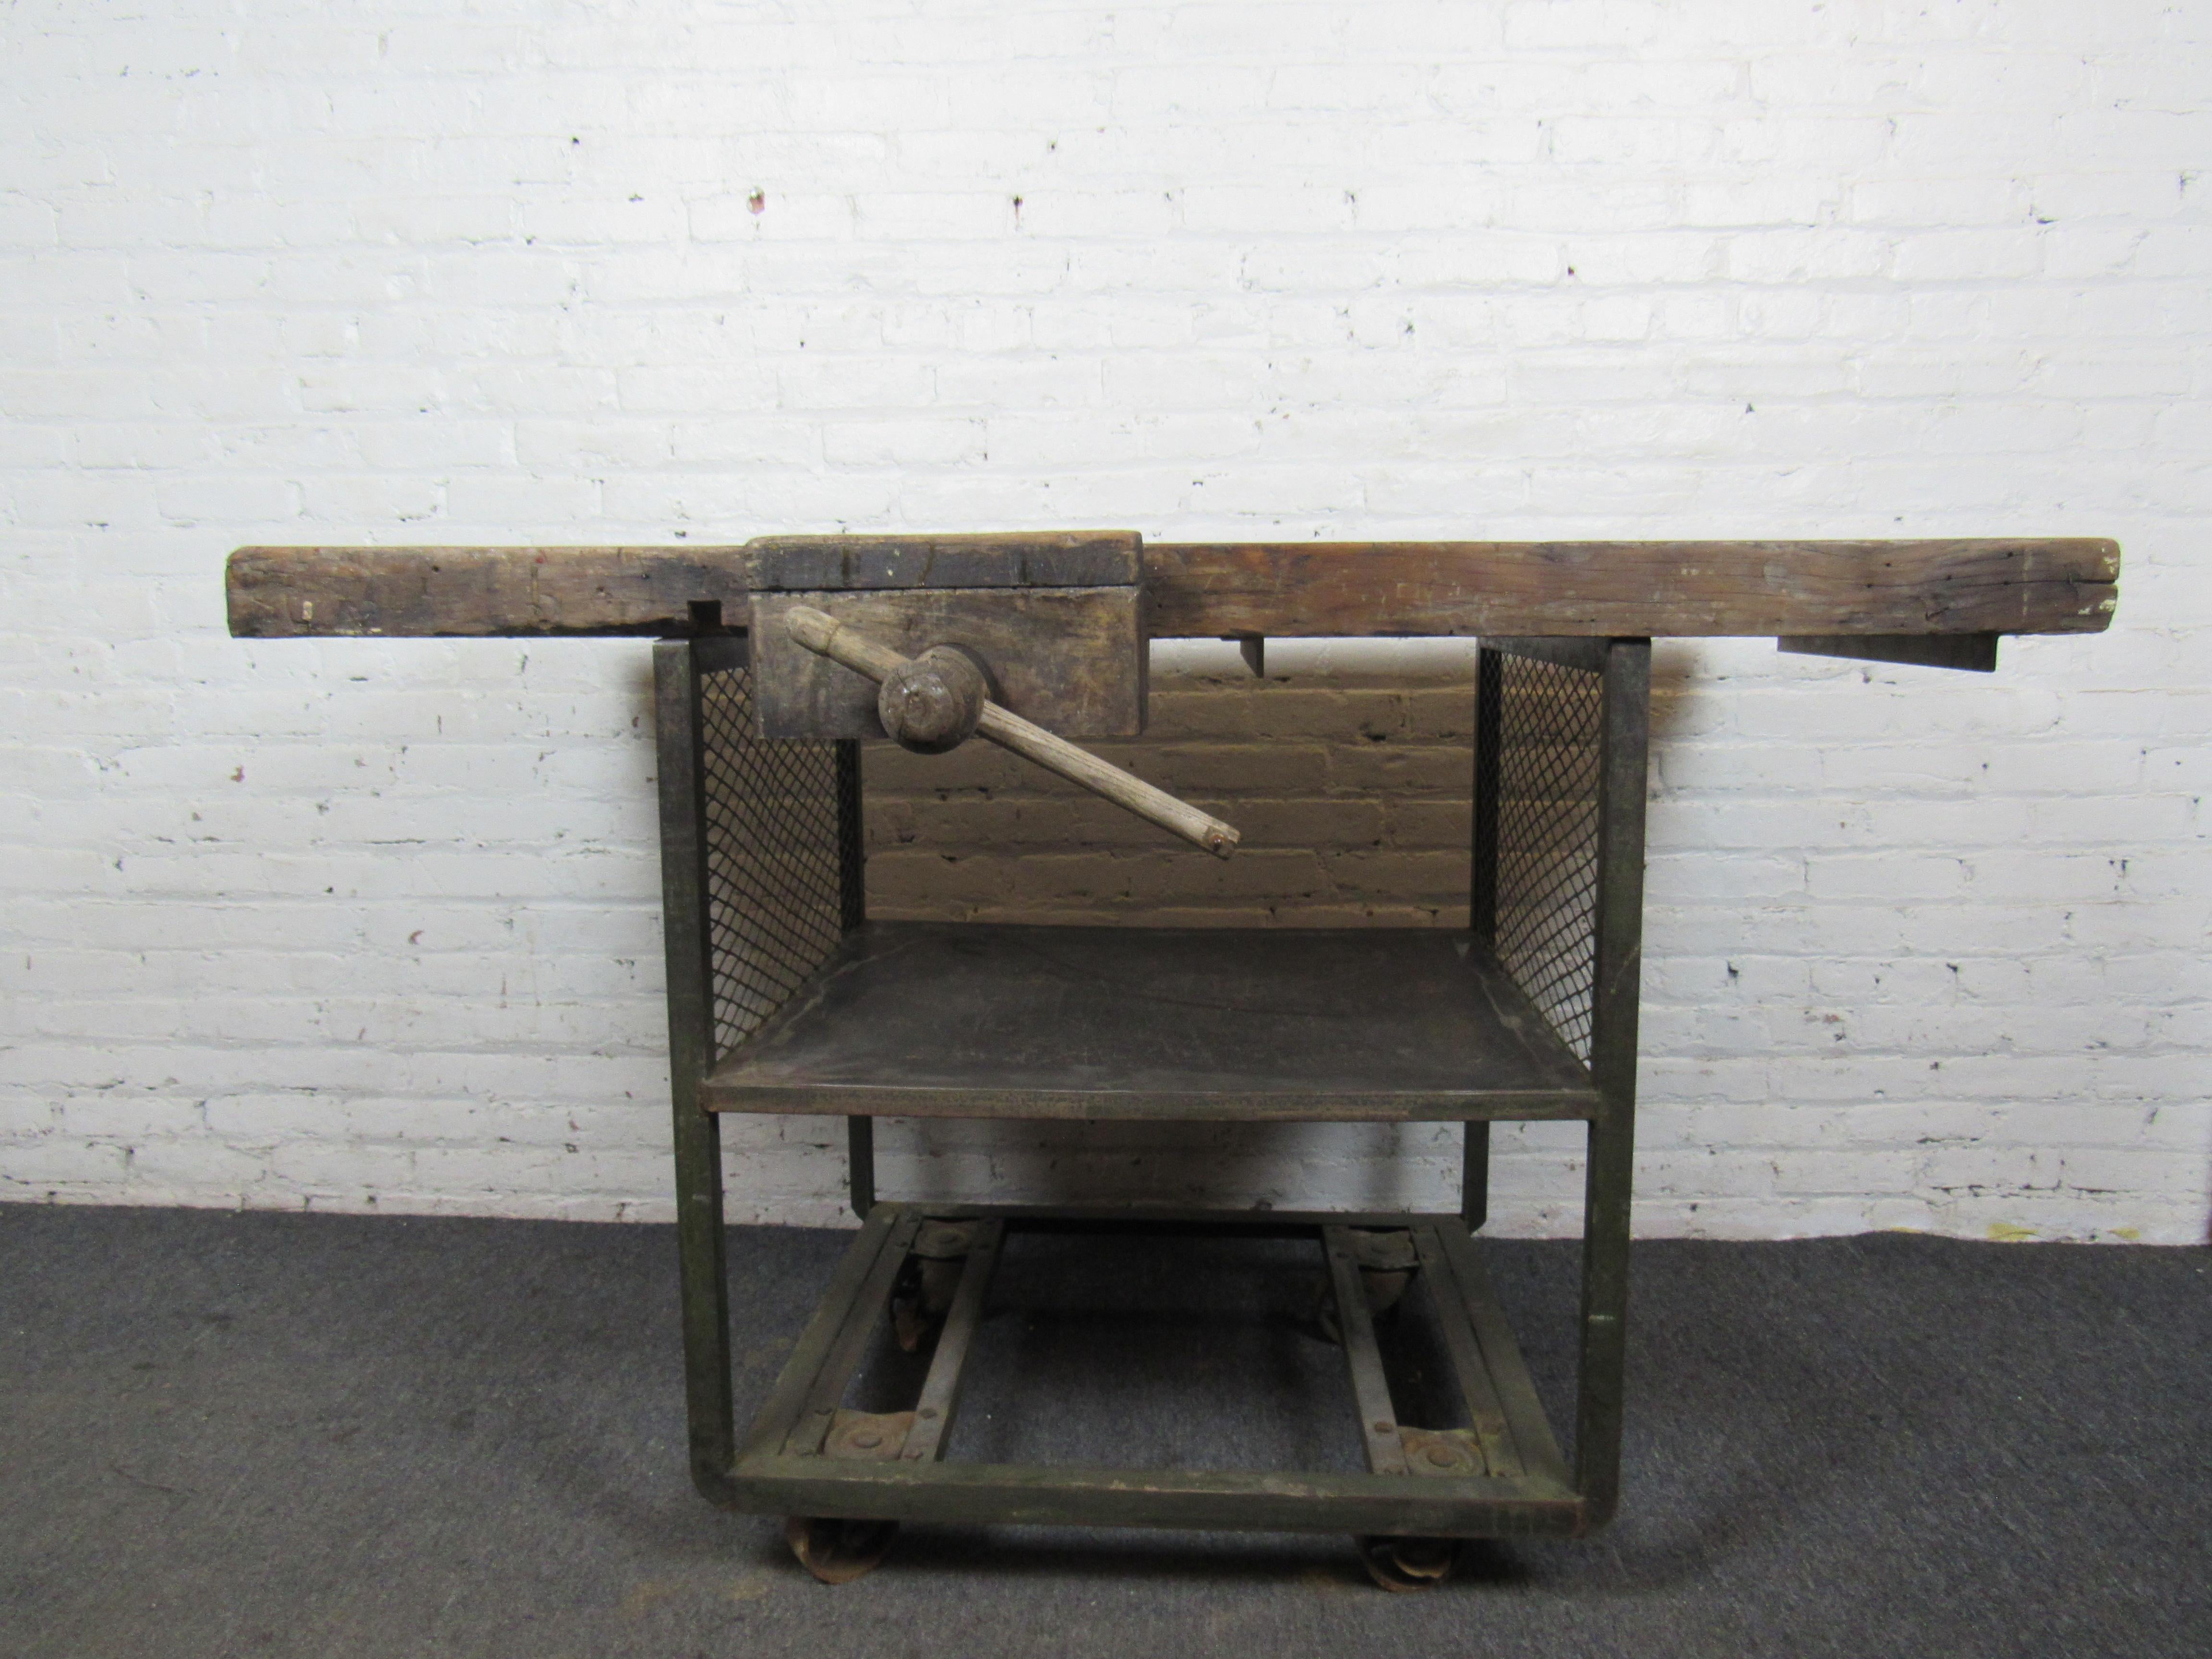 Unique multi-purpose work table with working vice on wheels. Can be used as an actual work table or in the kitchen for a cooking surface or perhaps a bar.
(Please confirm item location - NY or NJ - with dealer).
 